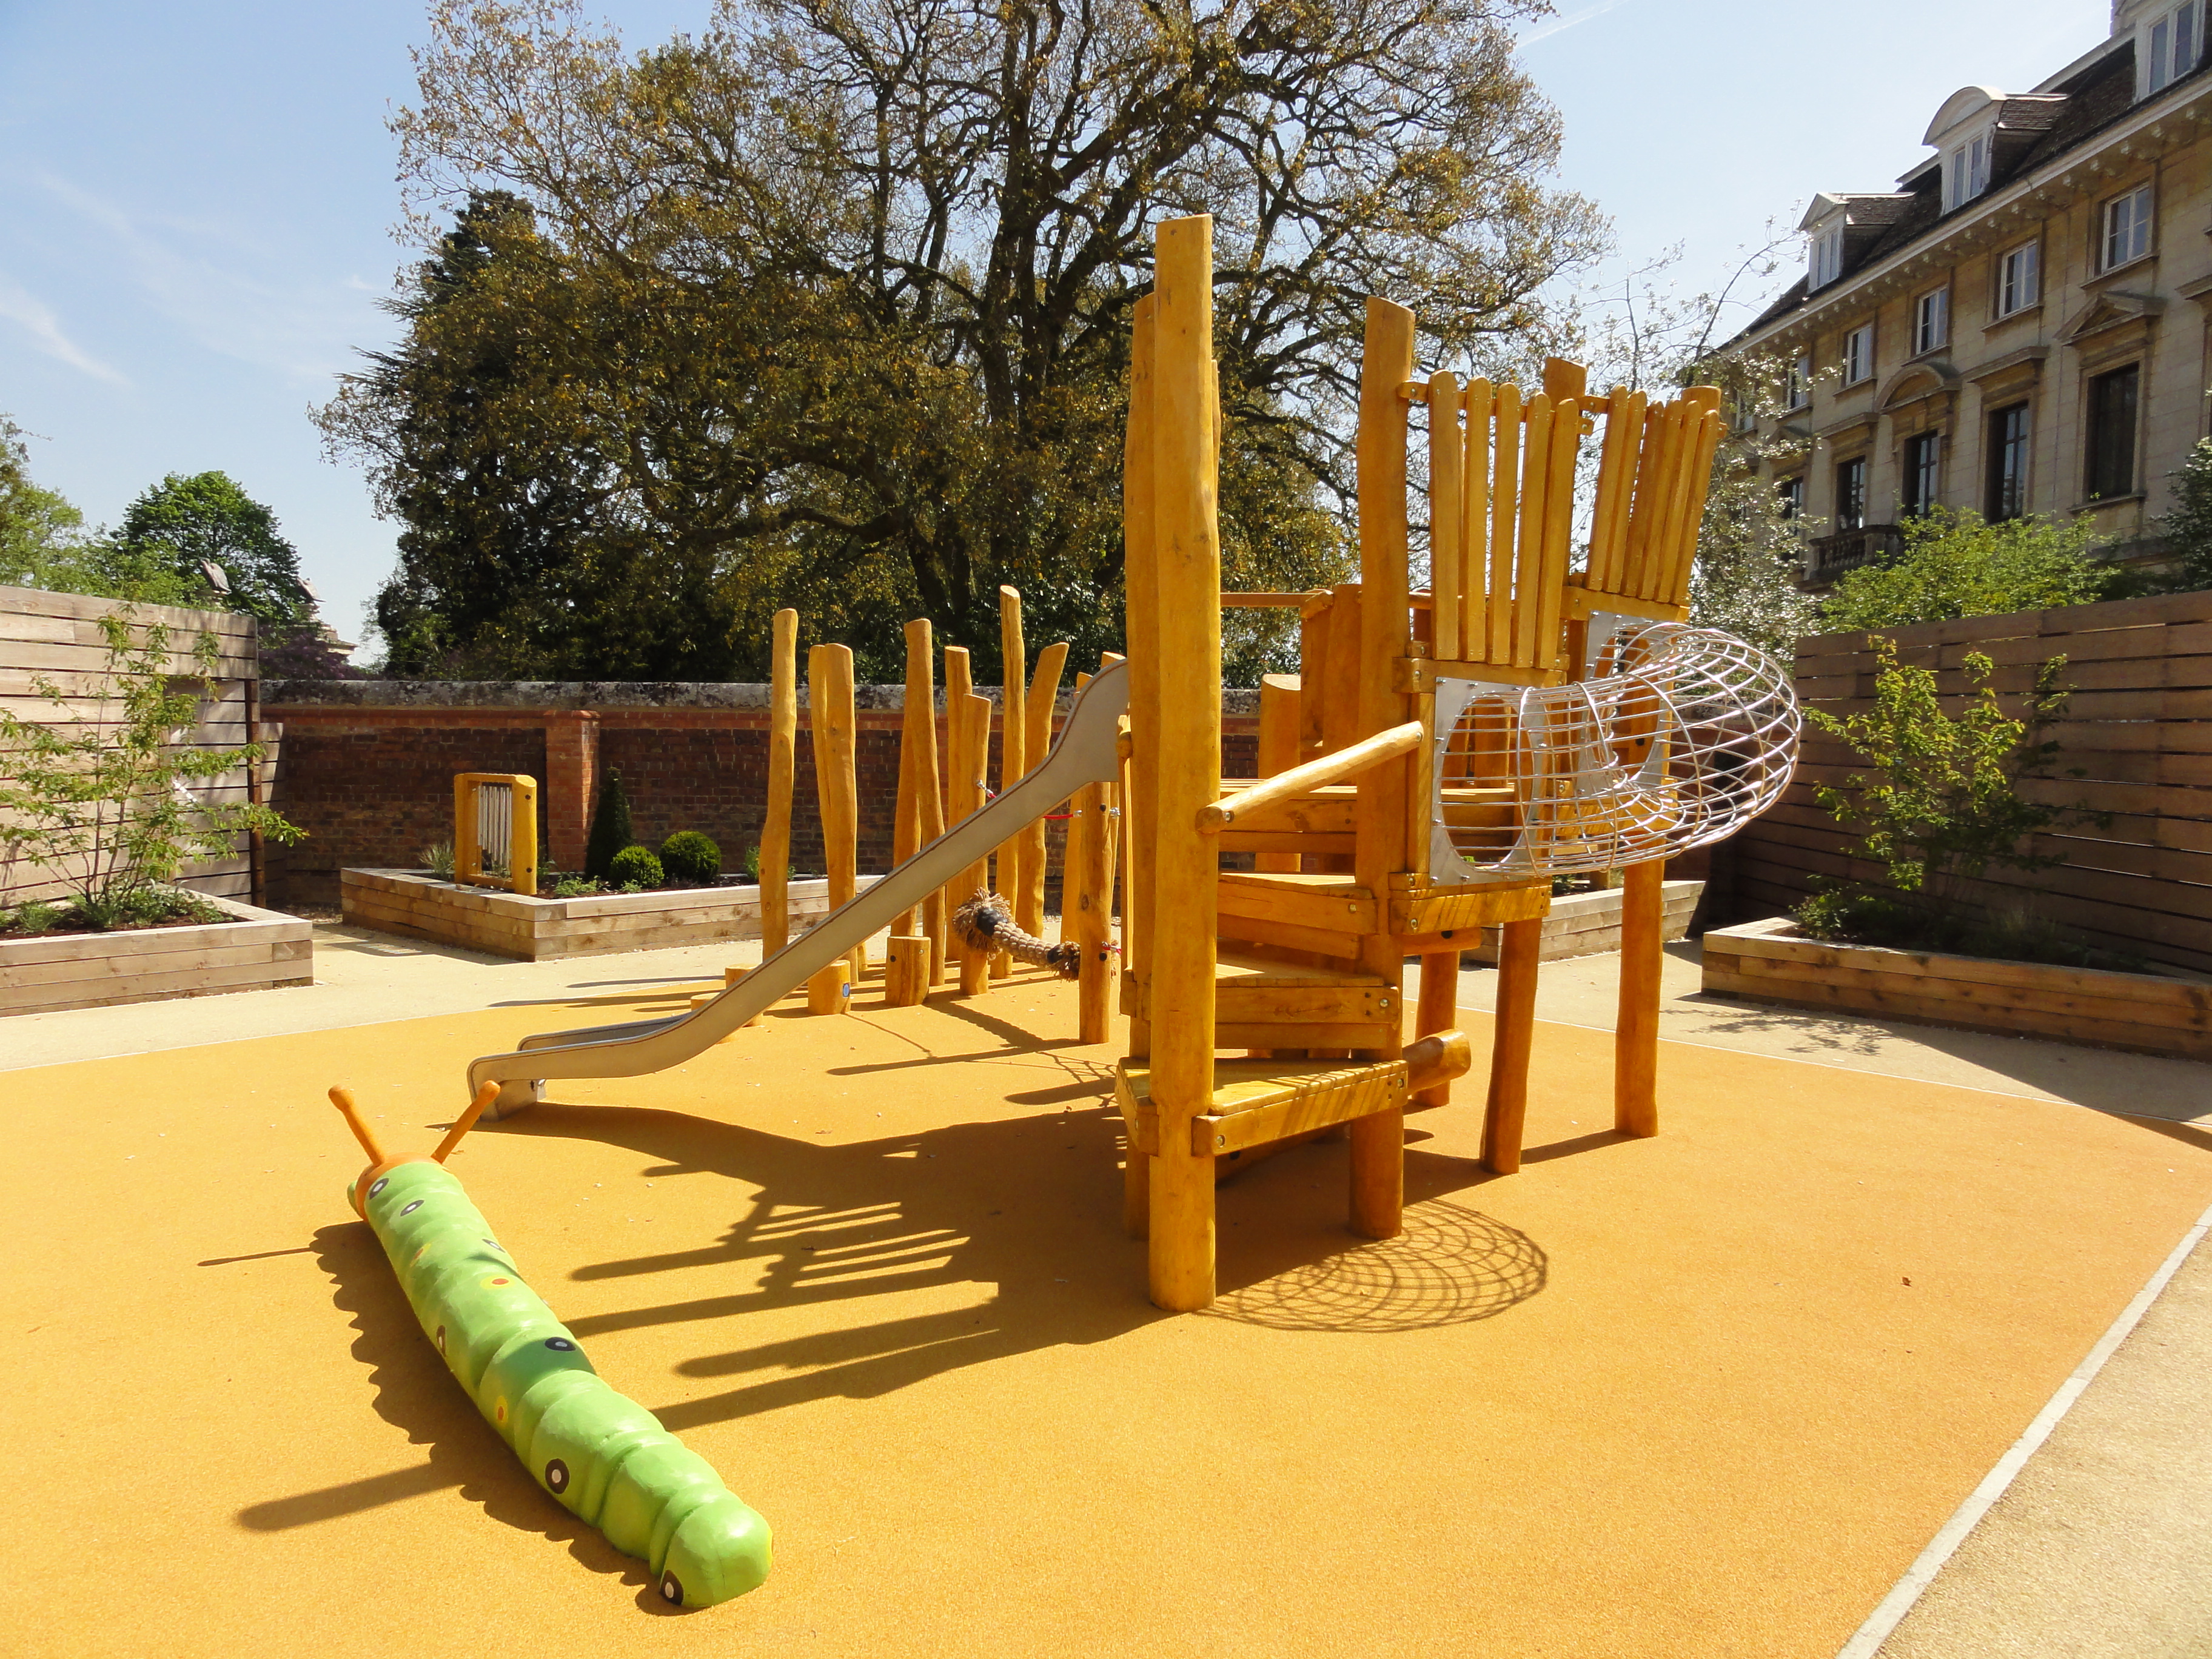 Playground Equipment by CPCL, incorporating crawling tunnel of stainless steel for The Sue Ryder Foundation